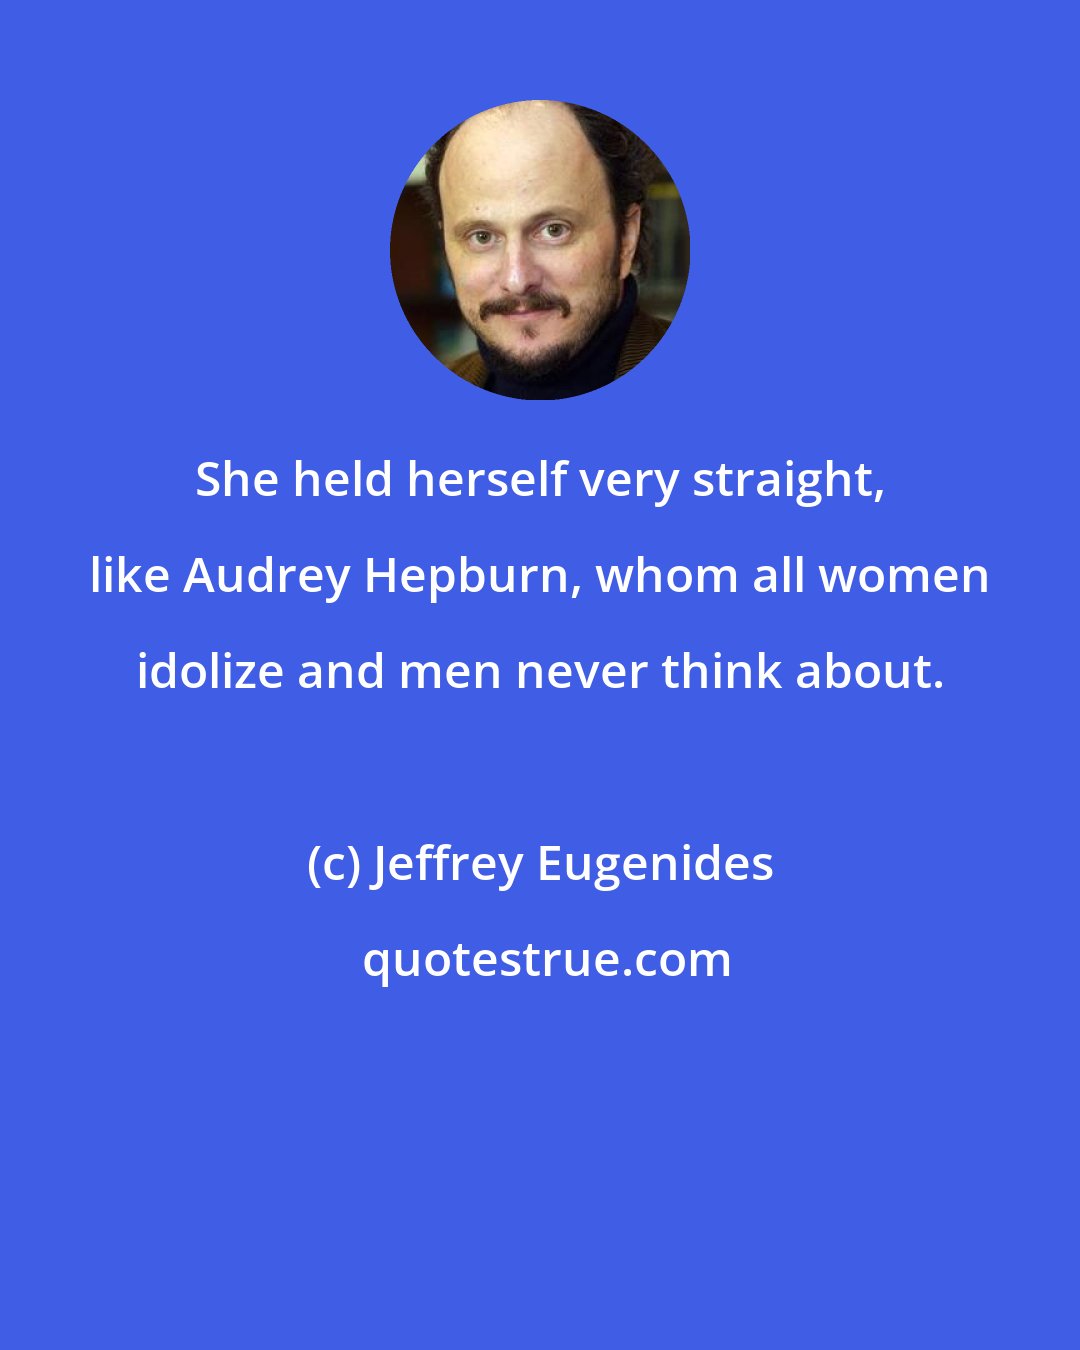 Jeffrey Eugenides: She held herself very straight, like Audrey Hepburn, whom all women idolize and men never think about.